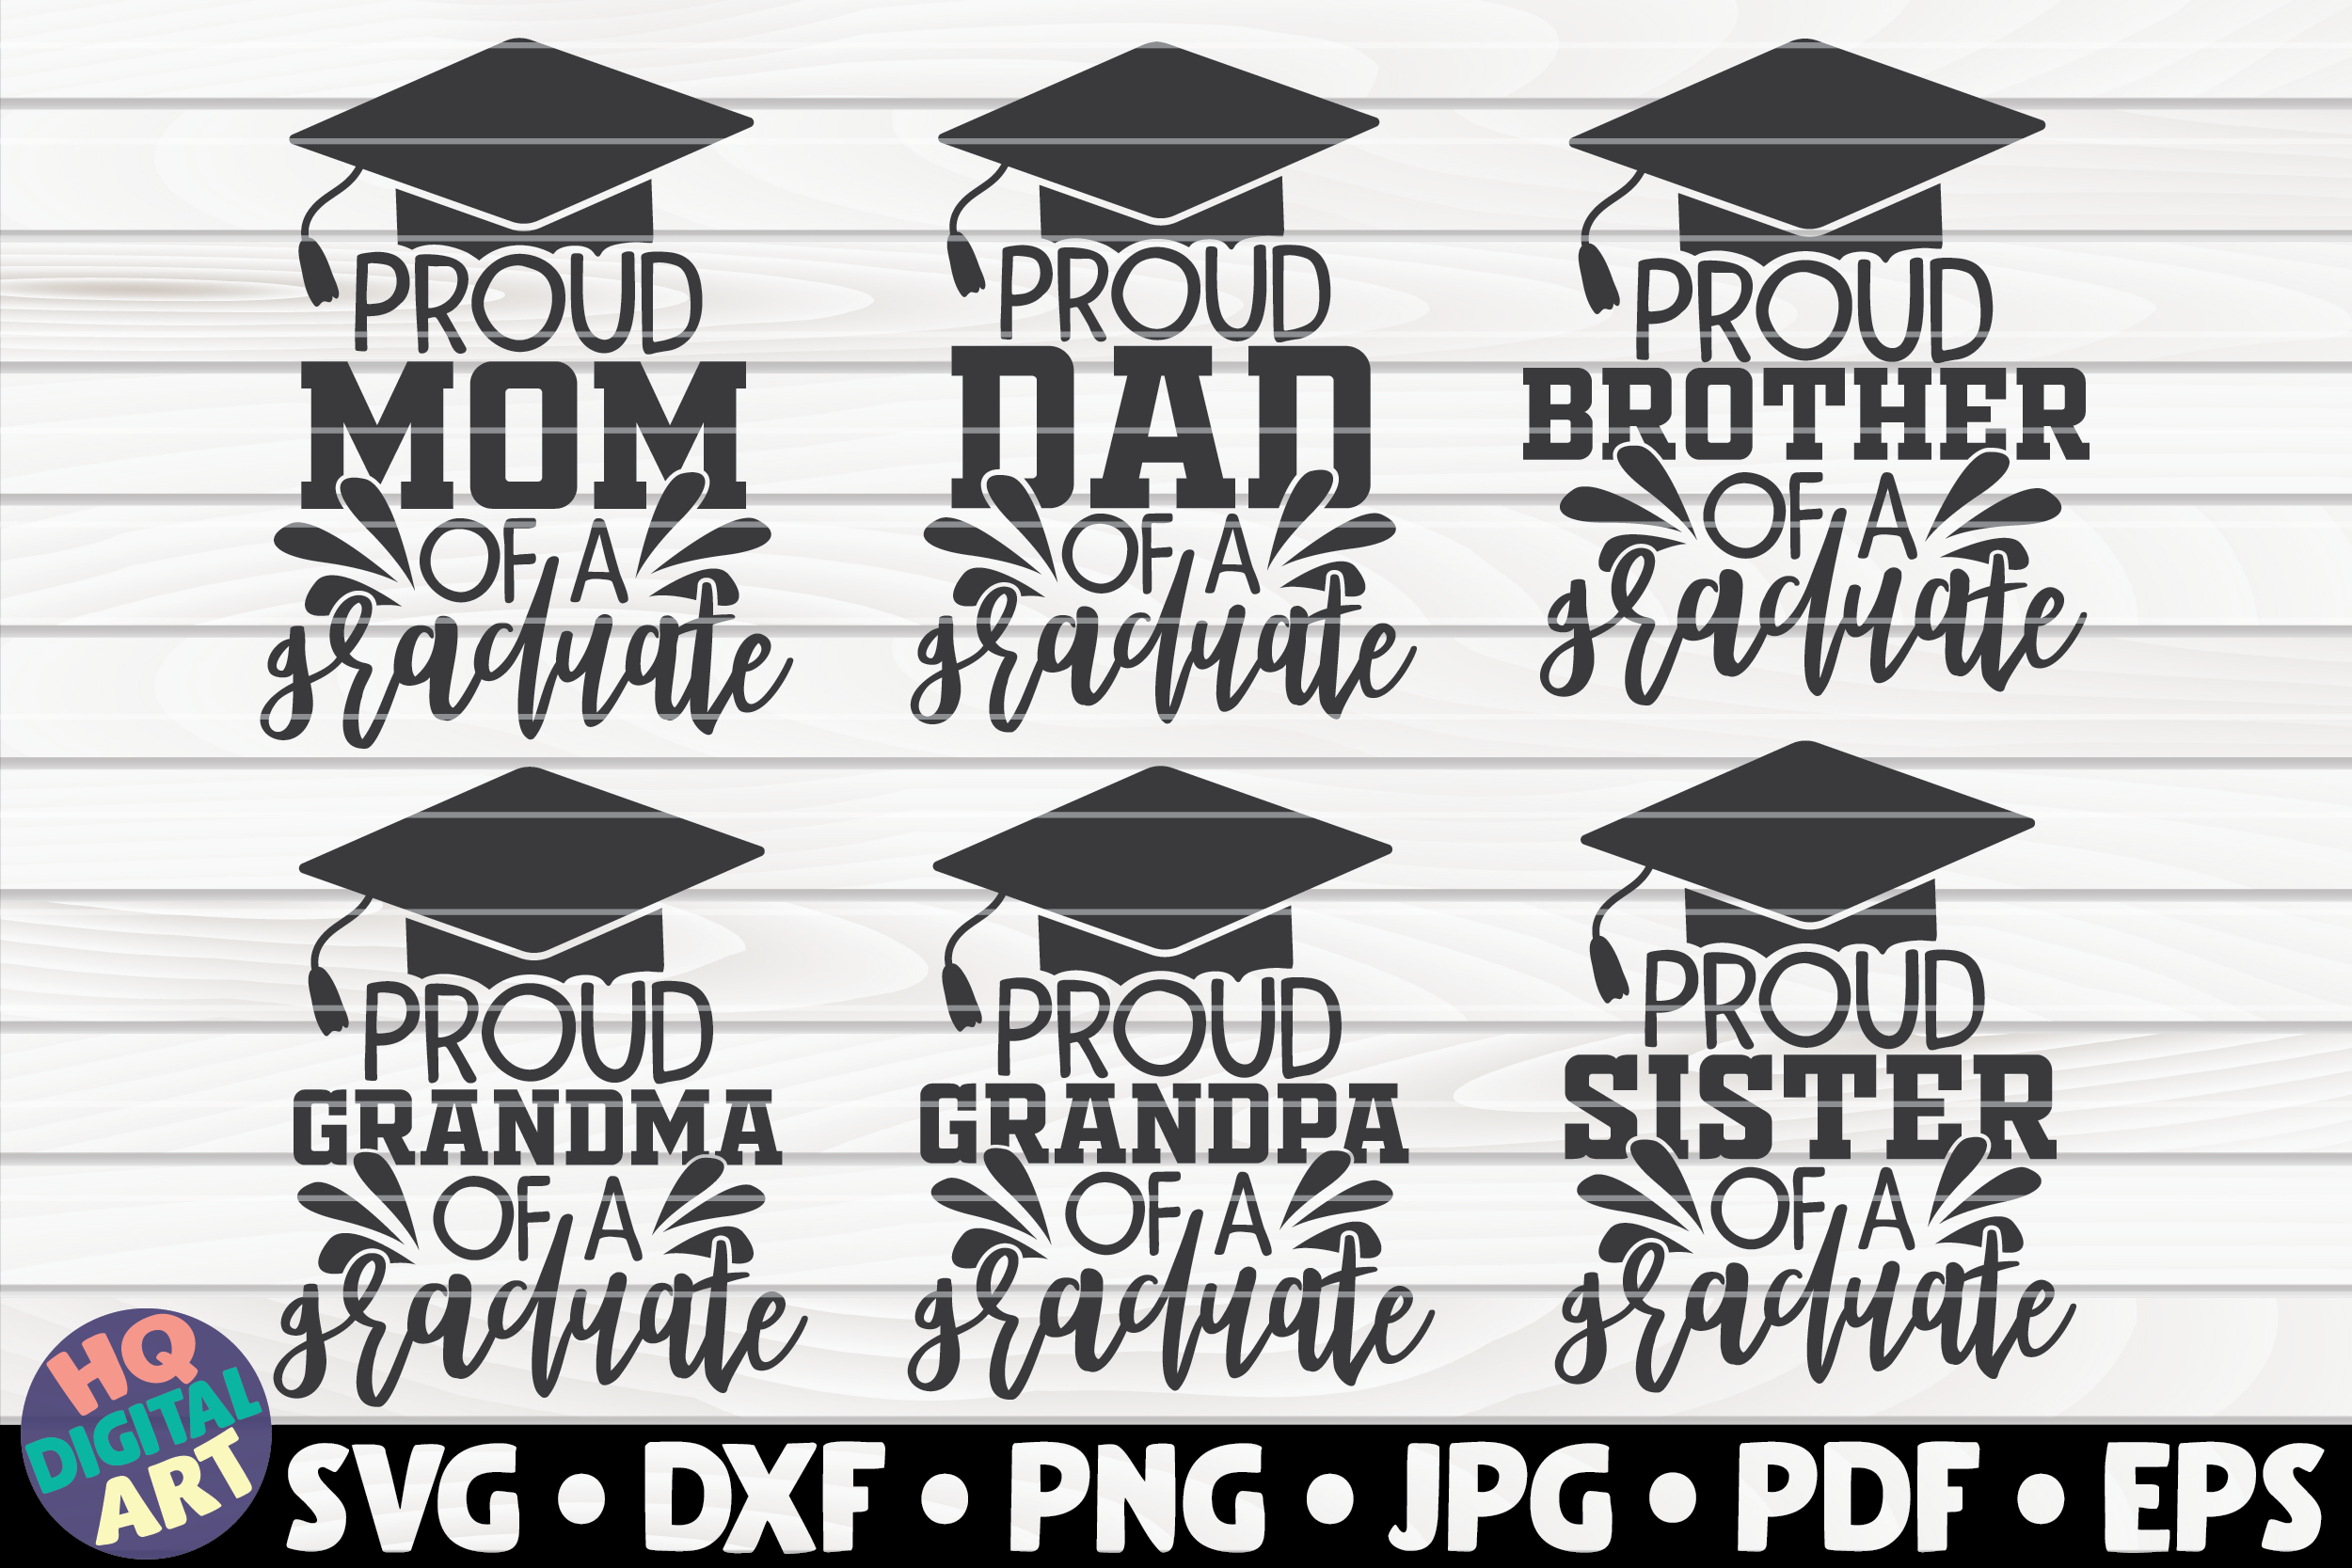 Download Proud Family Of A Graduate Svg Bundle By Hqdigitalart Thehungryjpeg Com